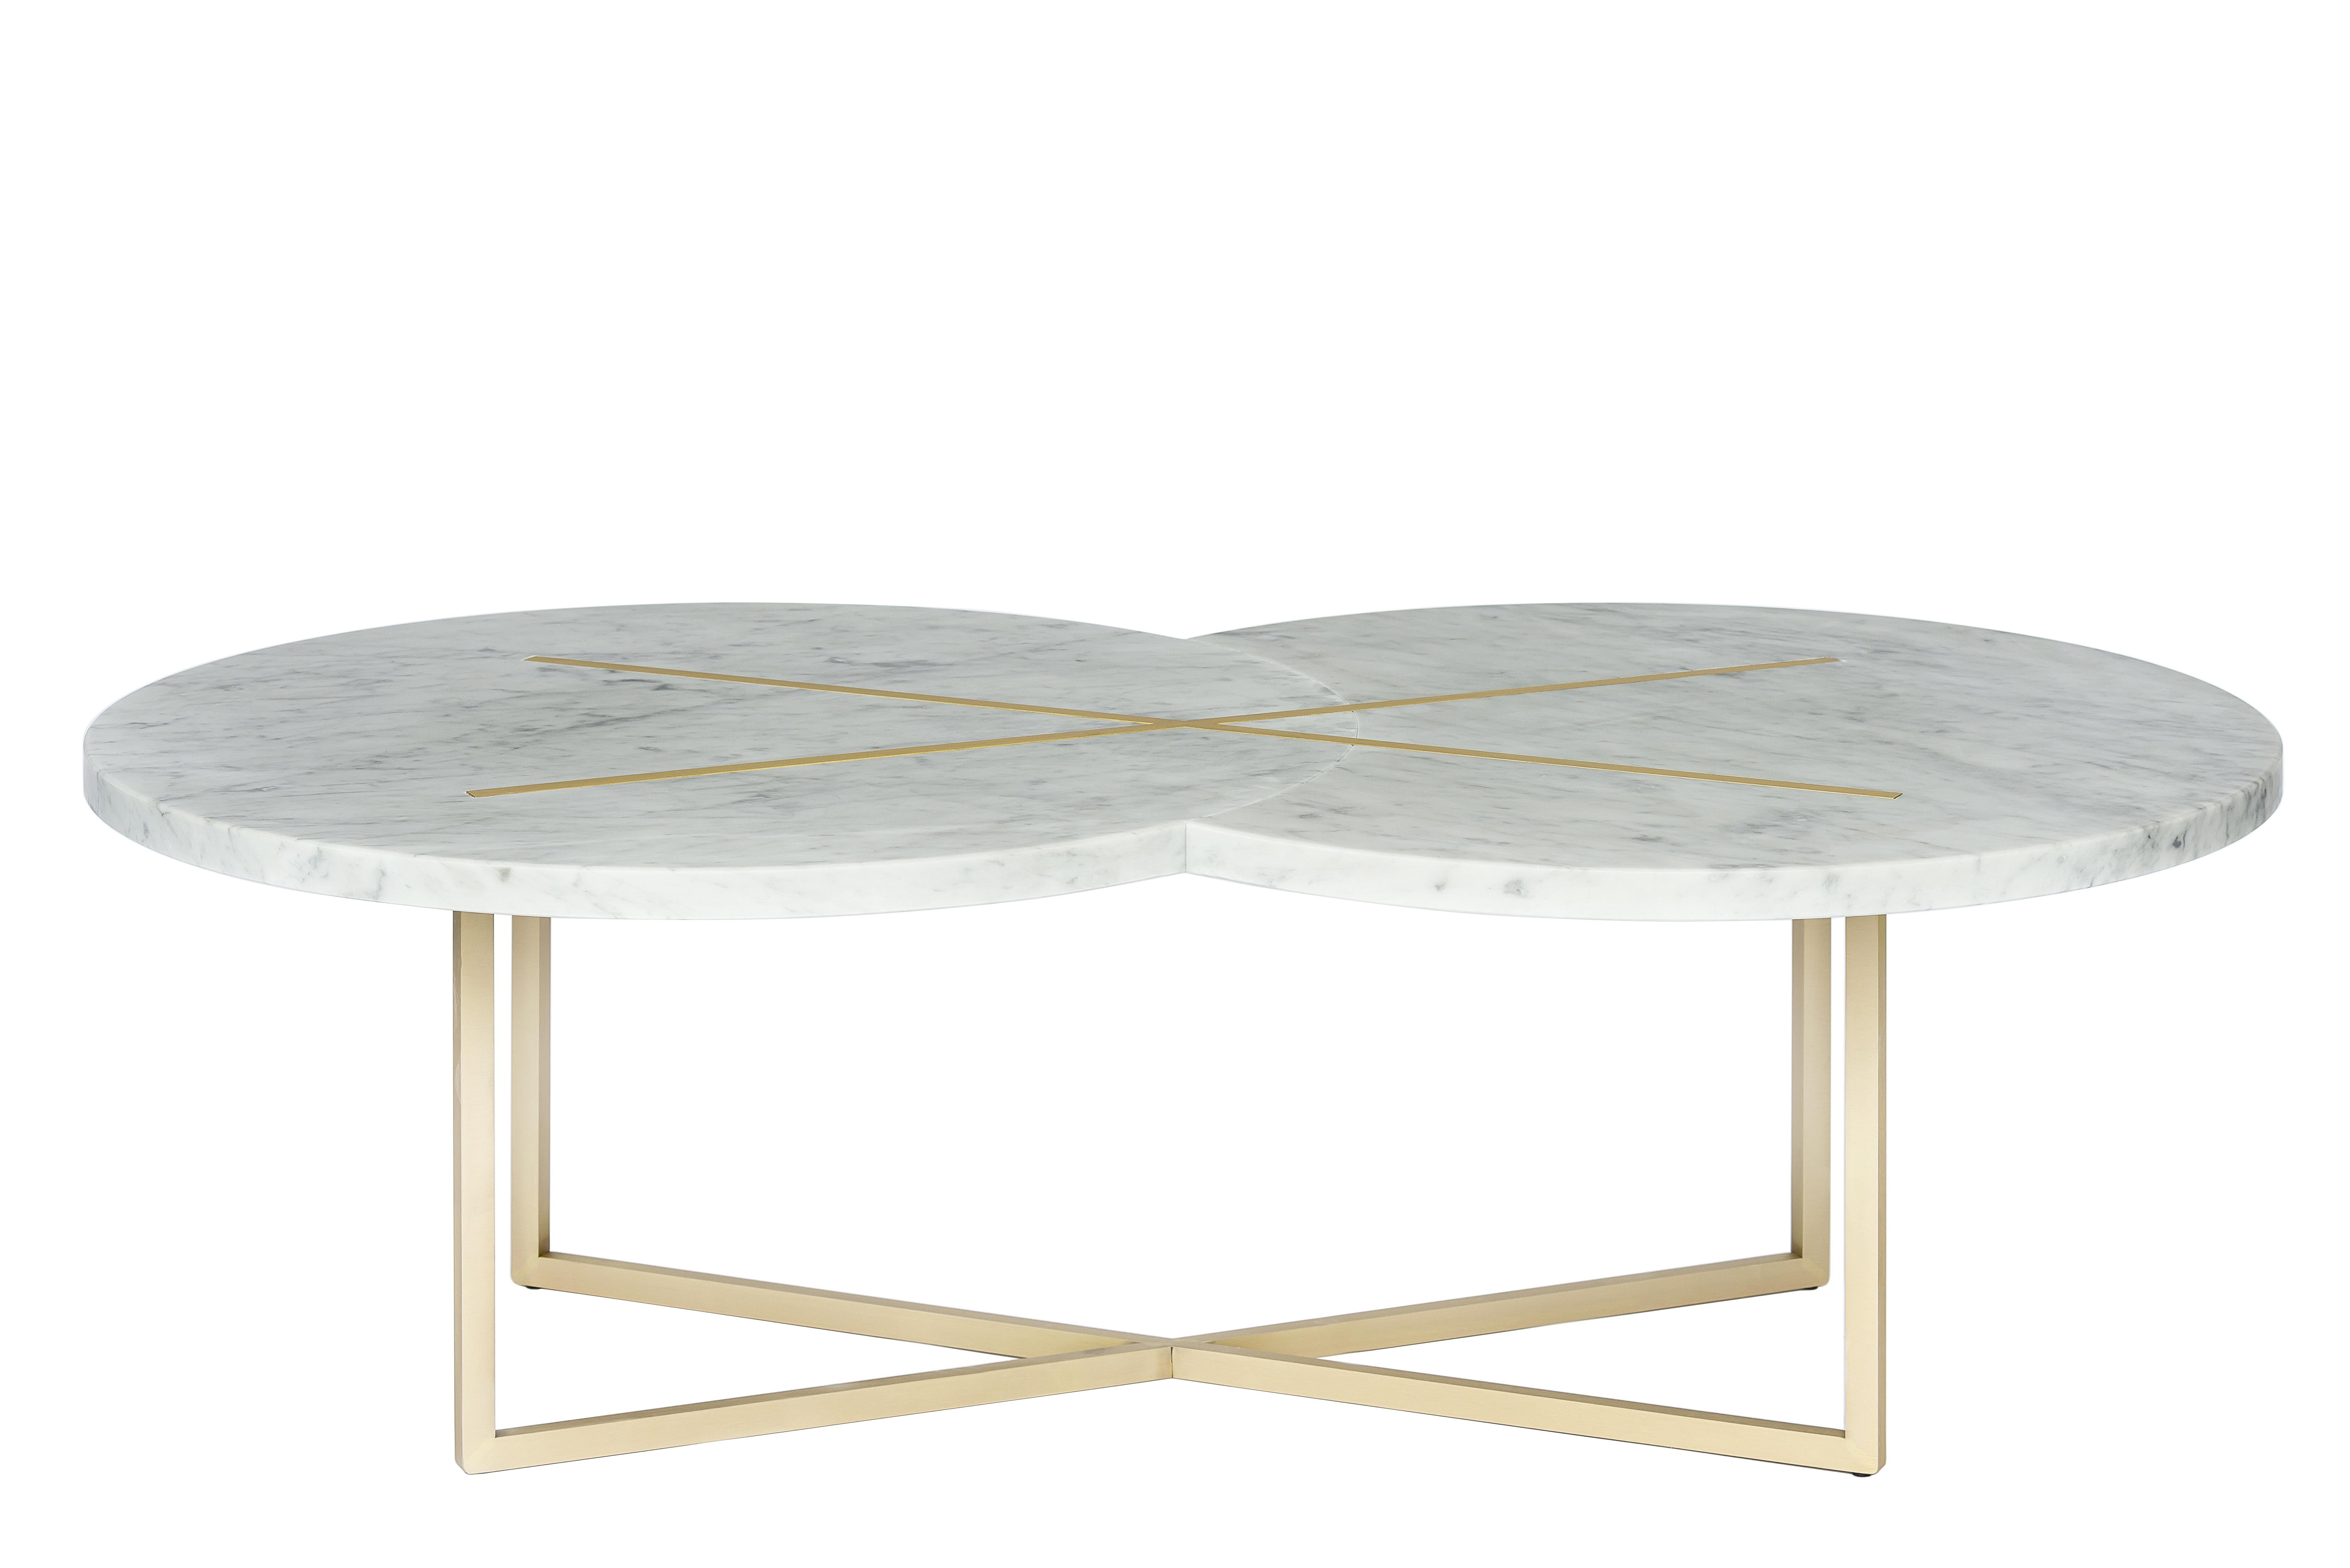 Eclipse X Coffee Table by Hagit Pincovici
Dimensions: 130 L x 76 W x 40 H
Materials: Carrara Marble, Brass

Hagit Pincovici founded her eponymous bespoke luxury furniture and lighting atelier in 2014. Known in her earlier work for a rich color